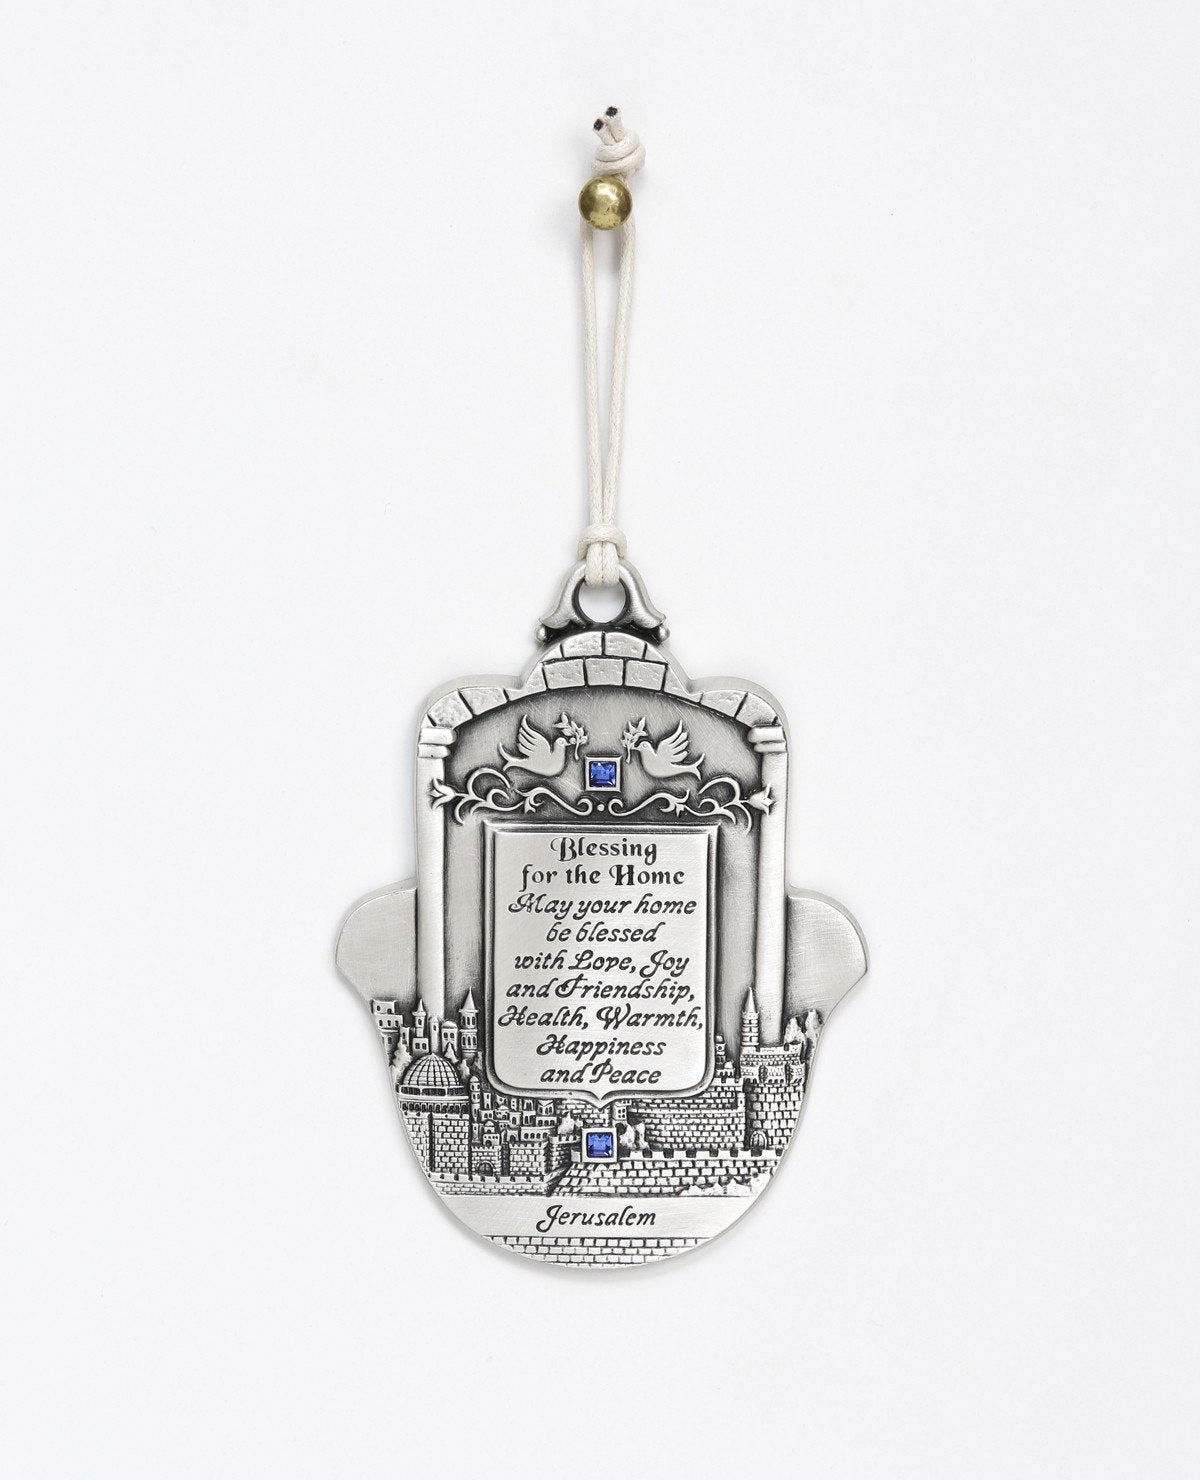 An impressively designed and uniquely decorated Hamsa hanging ornament coated in sterling silver. Decorated with an embossed image of Jerusalem and a pair of peace doves with an olive branch, alongside blessing words of love, joy, laughter and light for the home. Makes a thoughtful and loving gift that will brighten up any house. The Hamsa is embedded with blue Swarovski crystals and a natural colored faux leather string. 
Additional languages available: Hebrew and Russian.  Length: 13 cm  Width: 10 cm